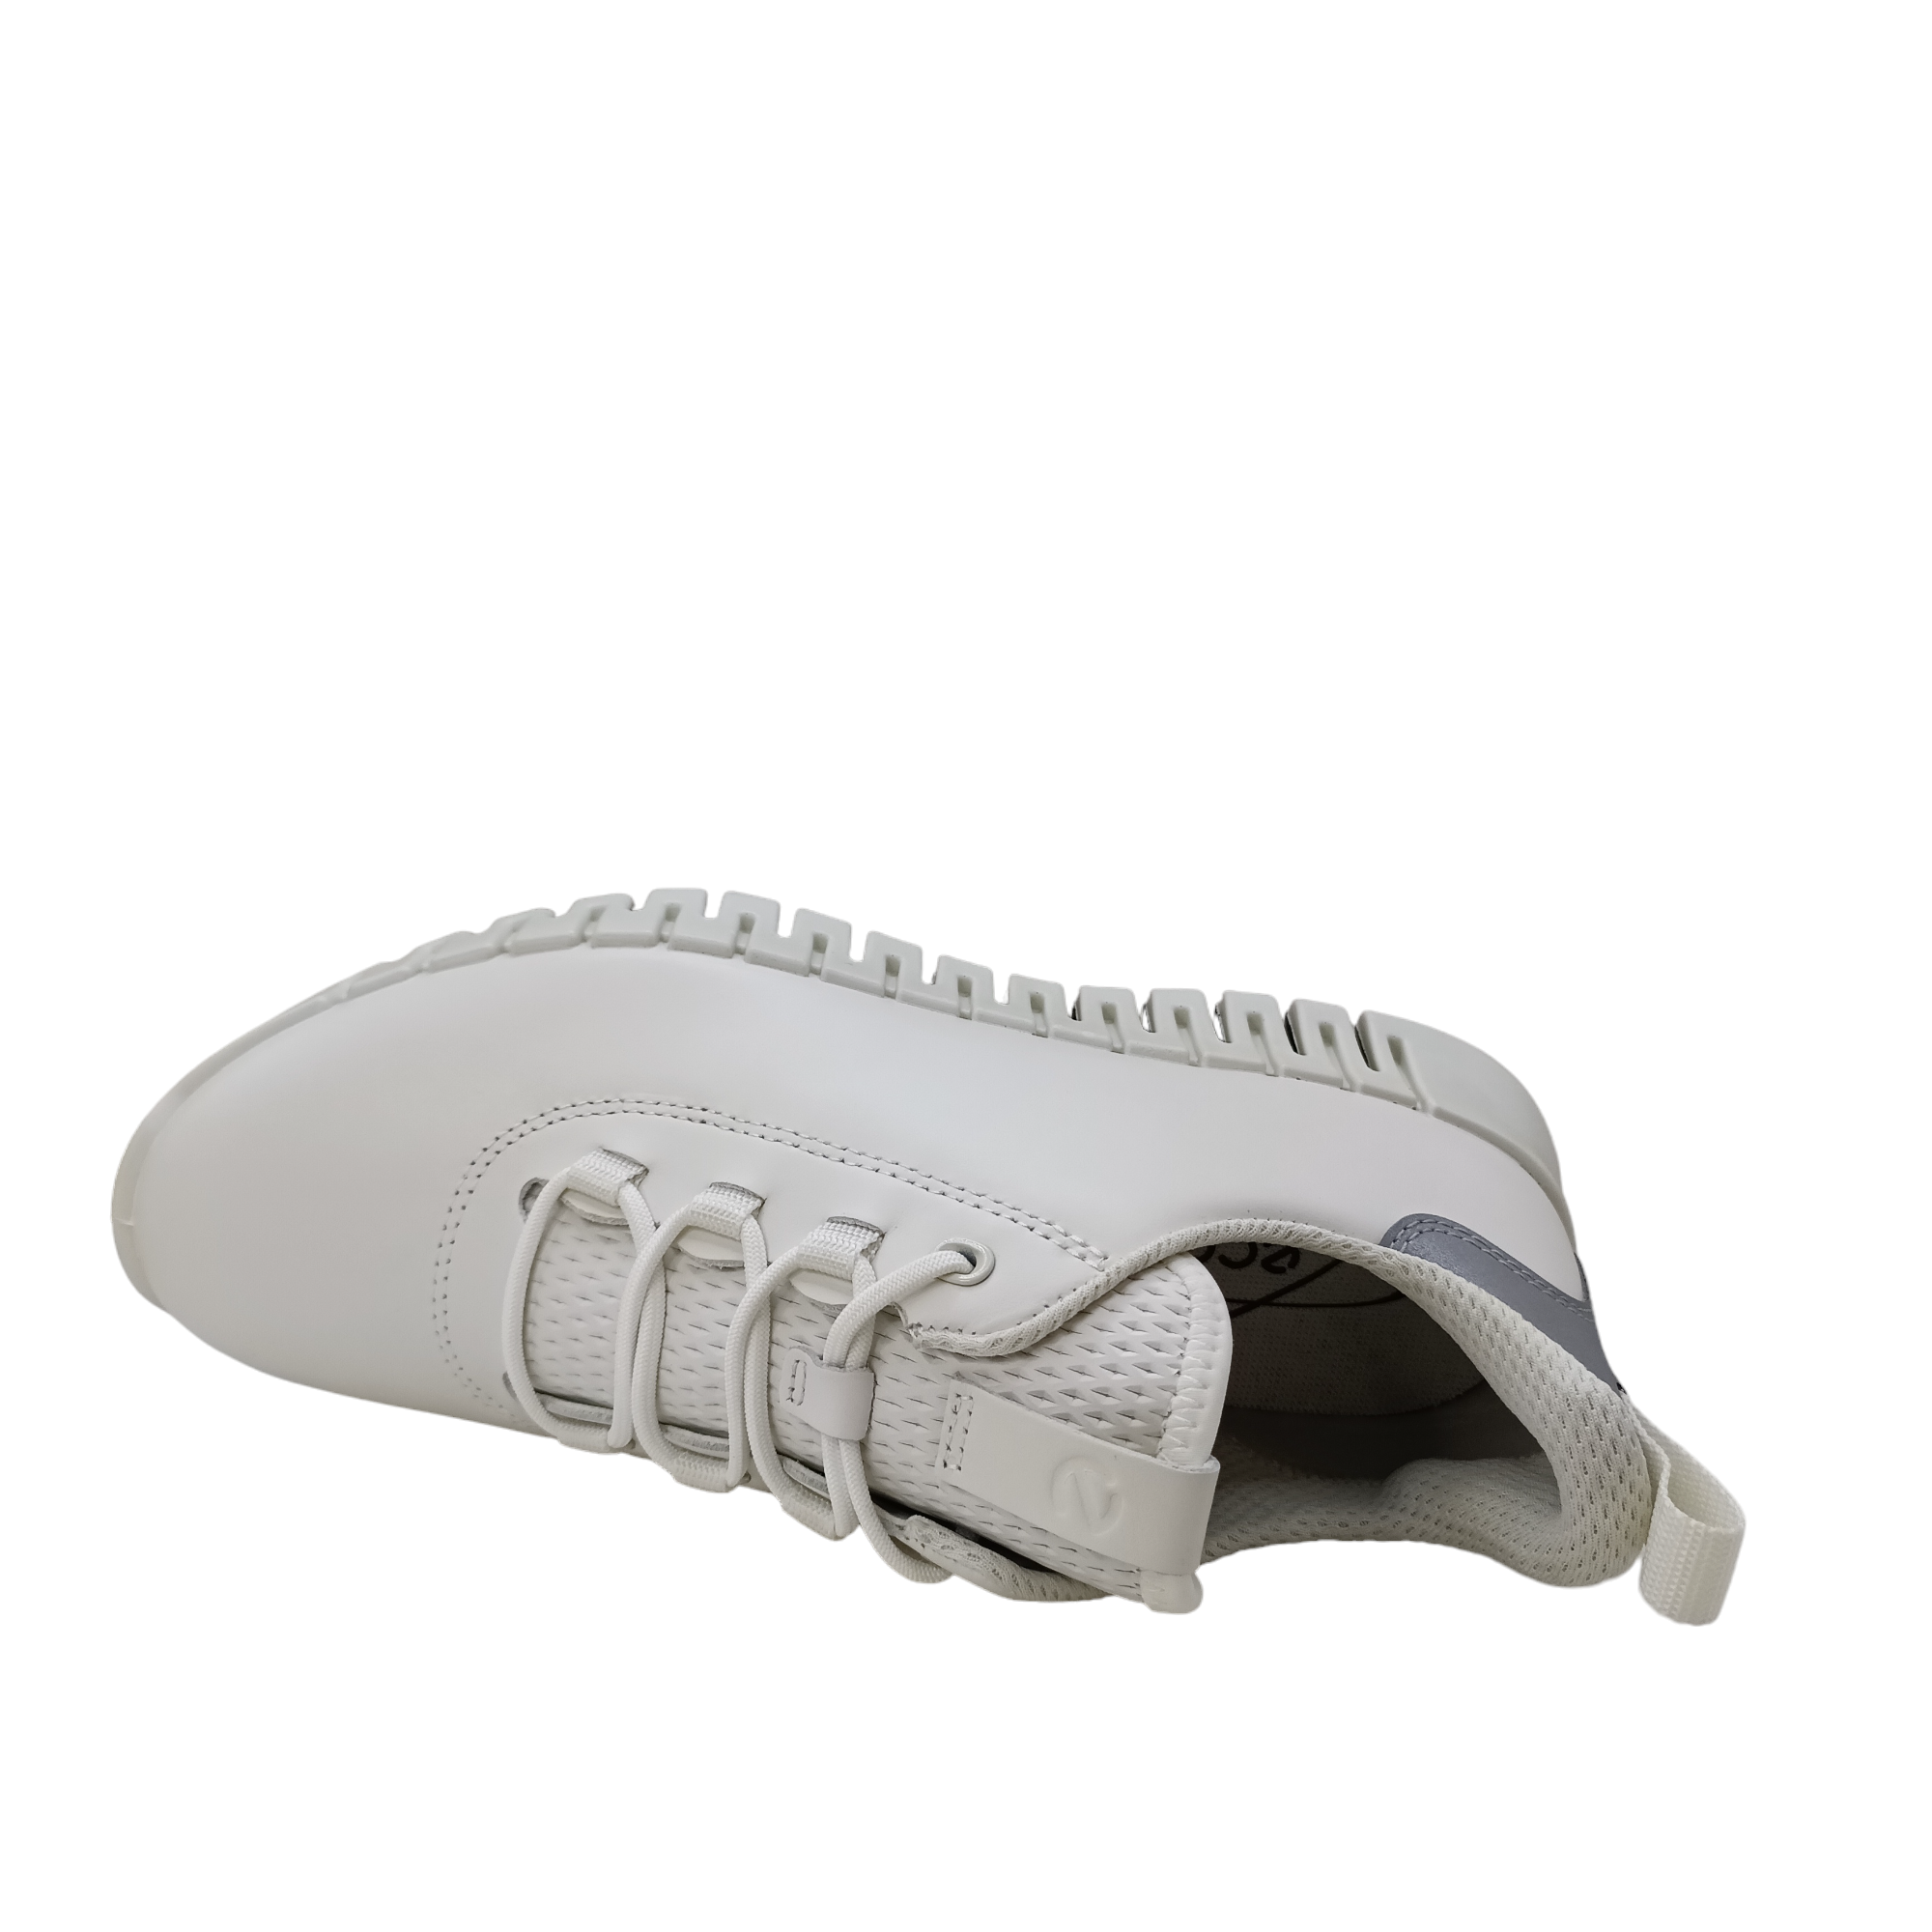 Shop Gruuv Sneaker W - with shoe&me - from Ecco - Sneakers - Sneaker, Winter, Womens